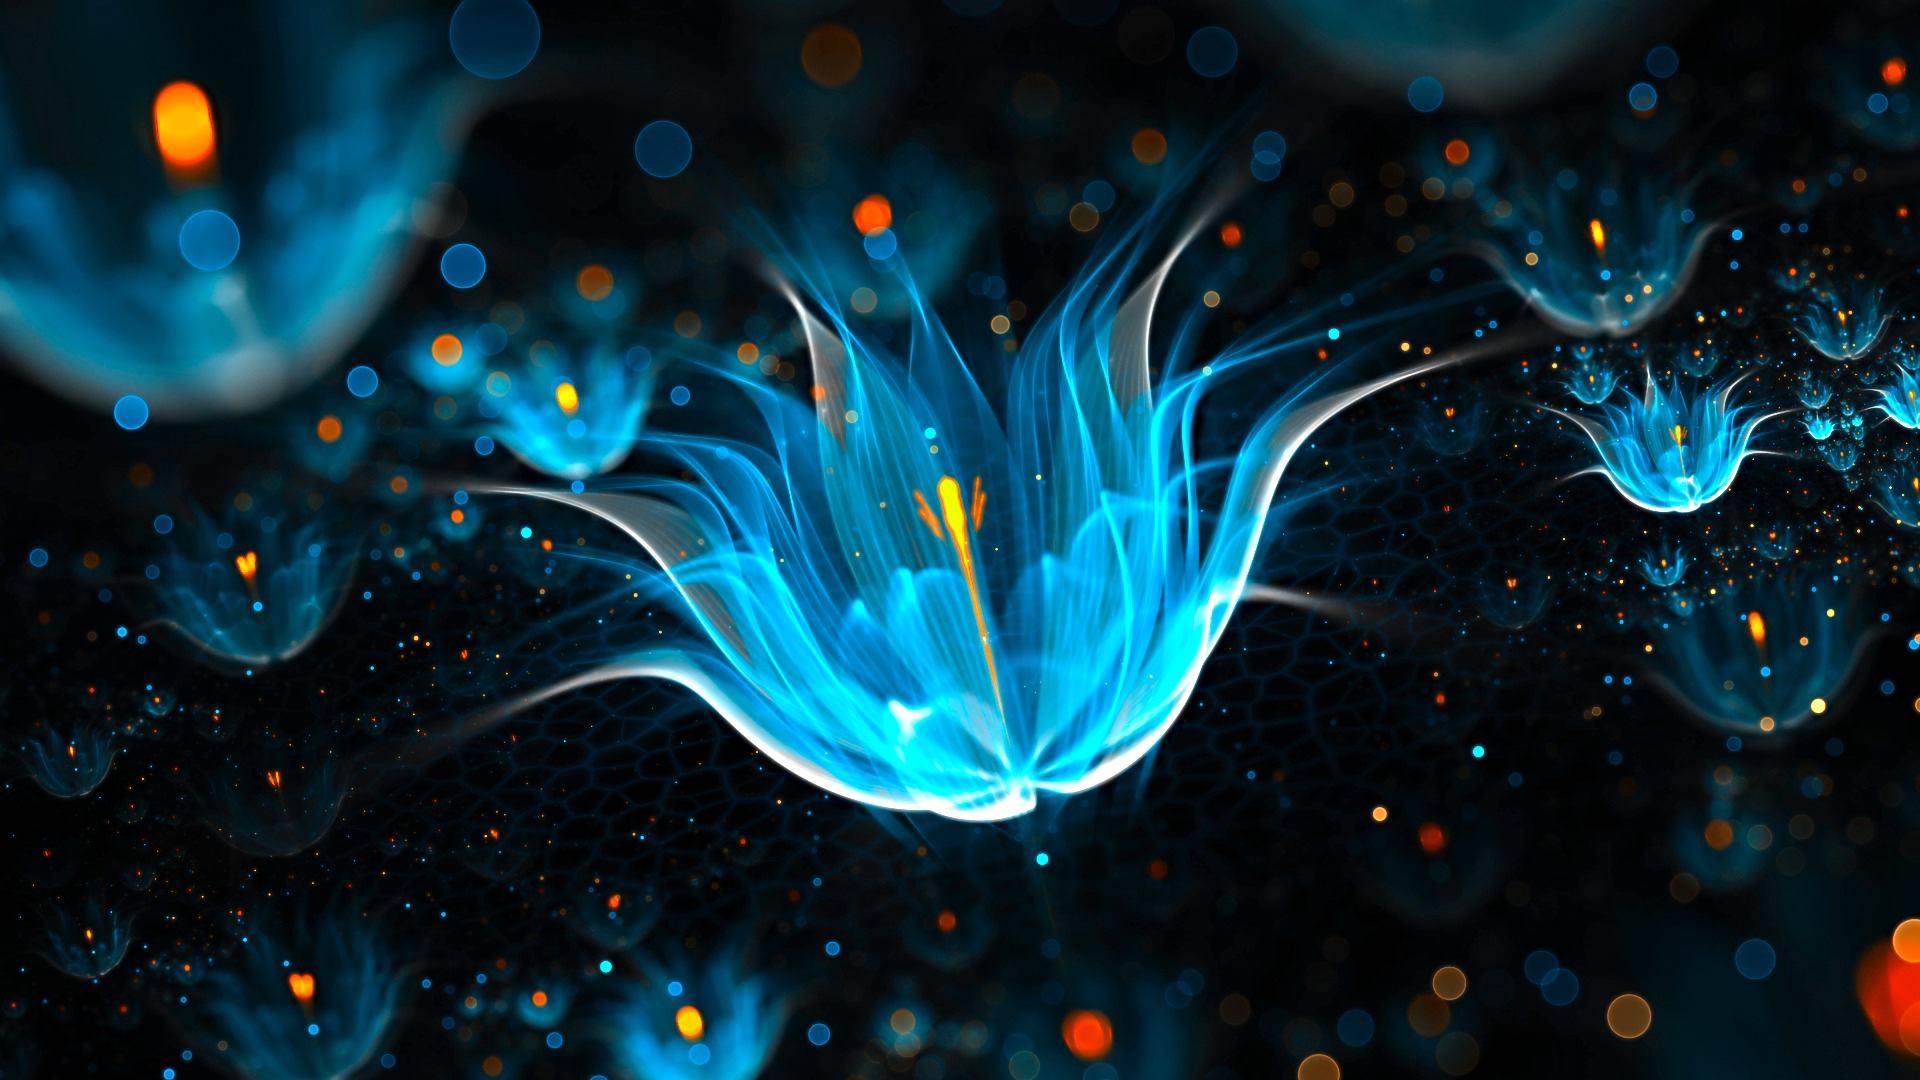 Abstract 1080p Wallpapers For Pc - HD Wallpaper 